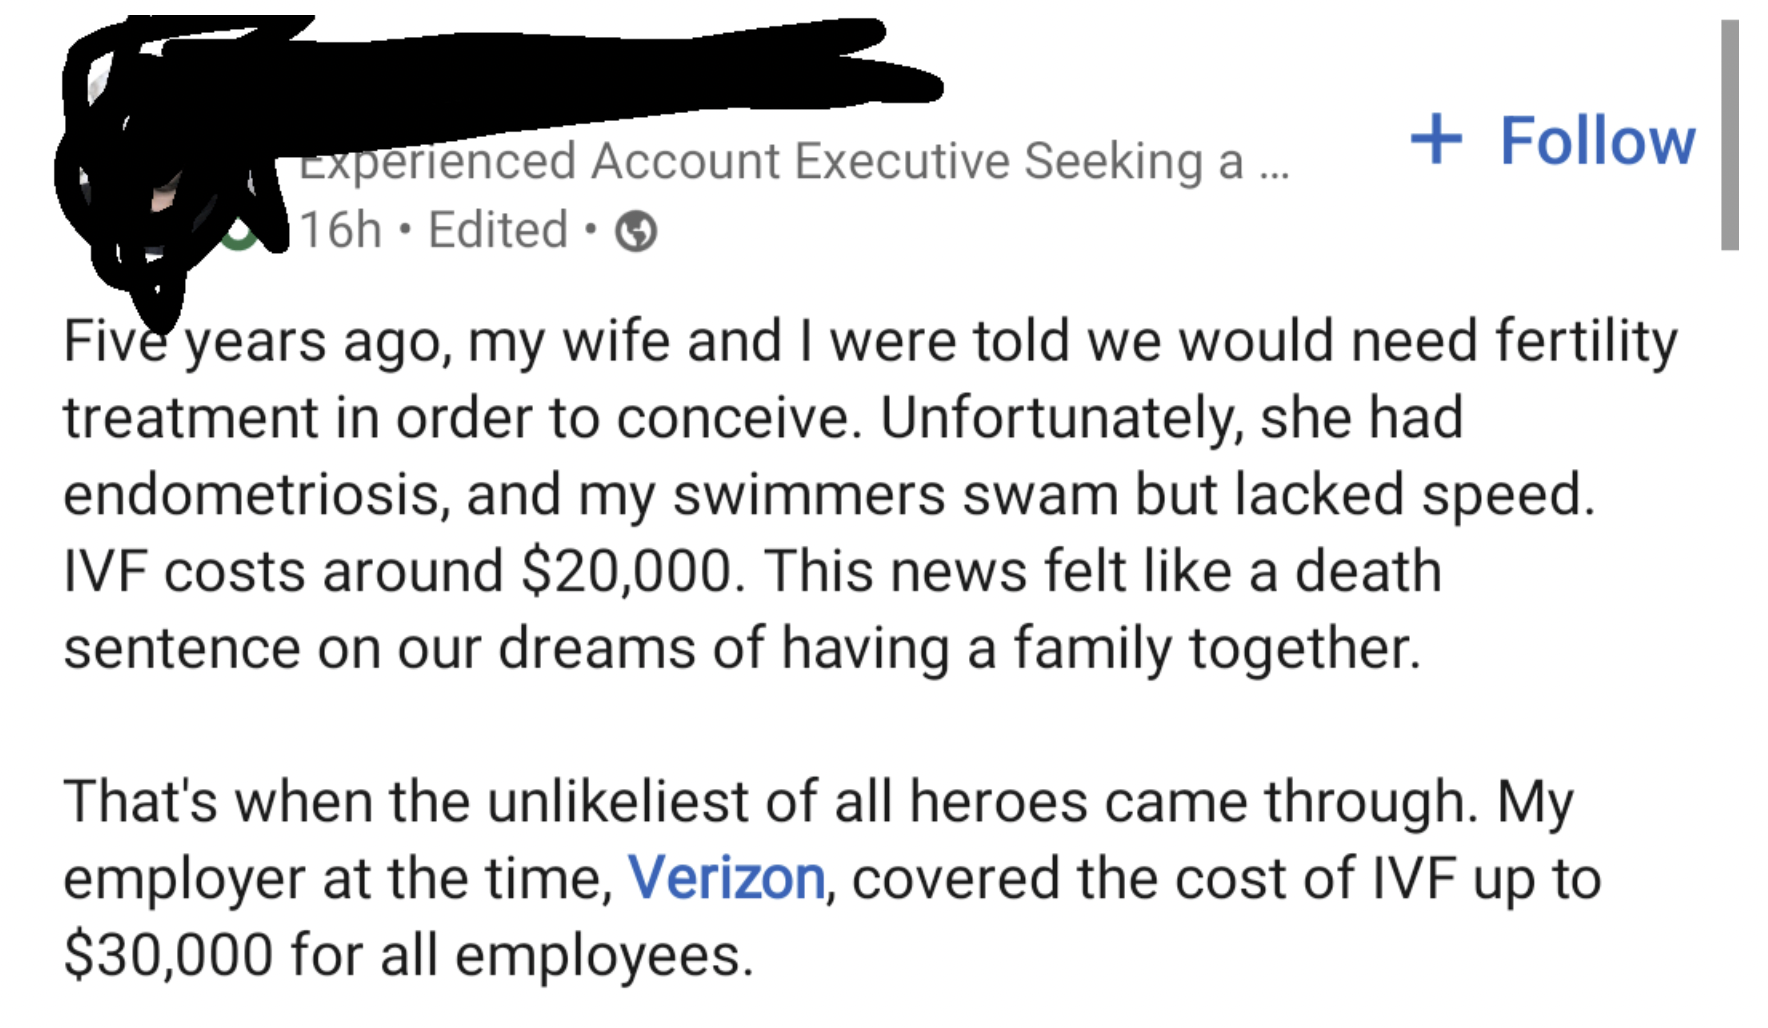 number - Experienced Account Executive Seeking a ... 16h Edited Five years ago, my wife and I were told we would need fertility treatment in order to conceive. Unfortunately, she had endometriosis, and my swimmers swam but lacked speed. Ivf costs around $